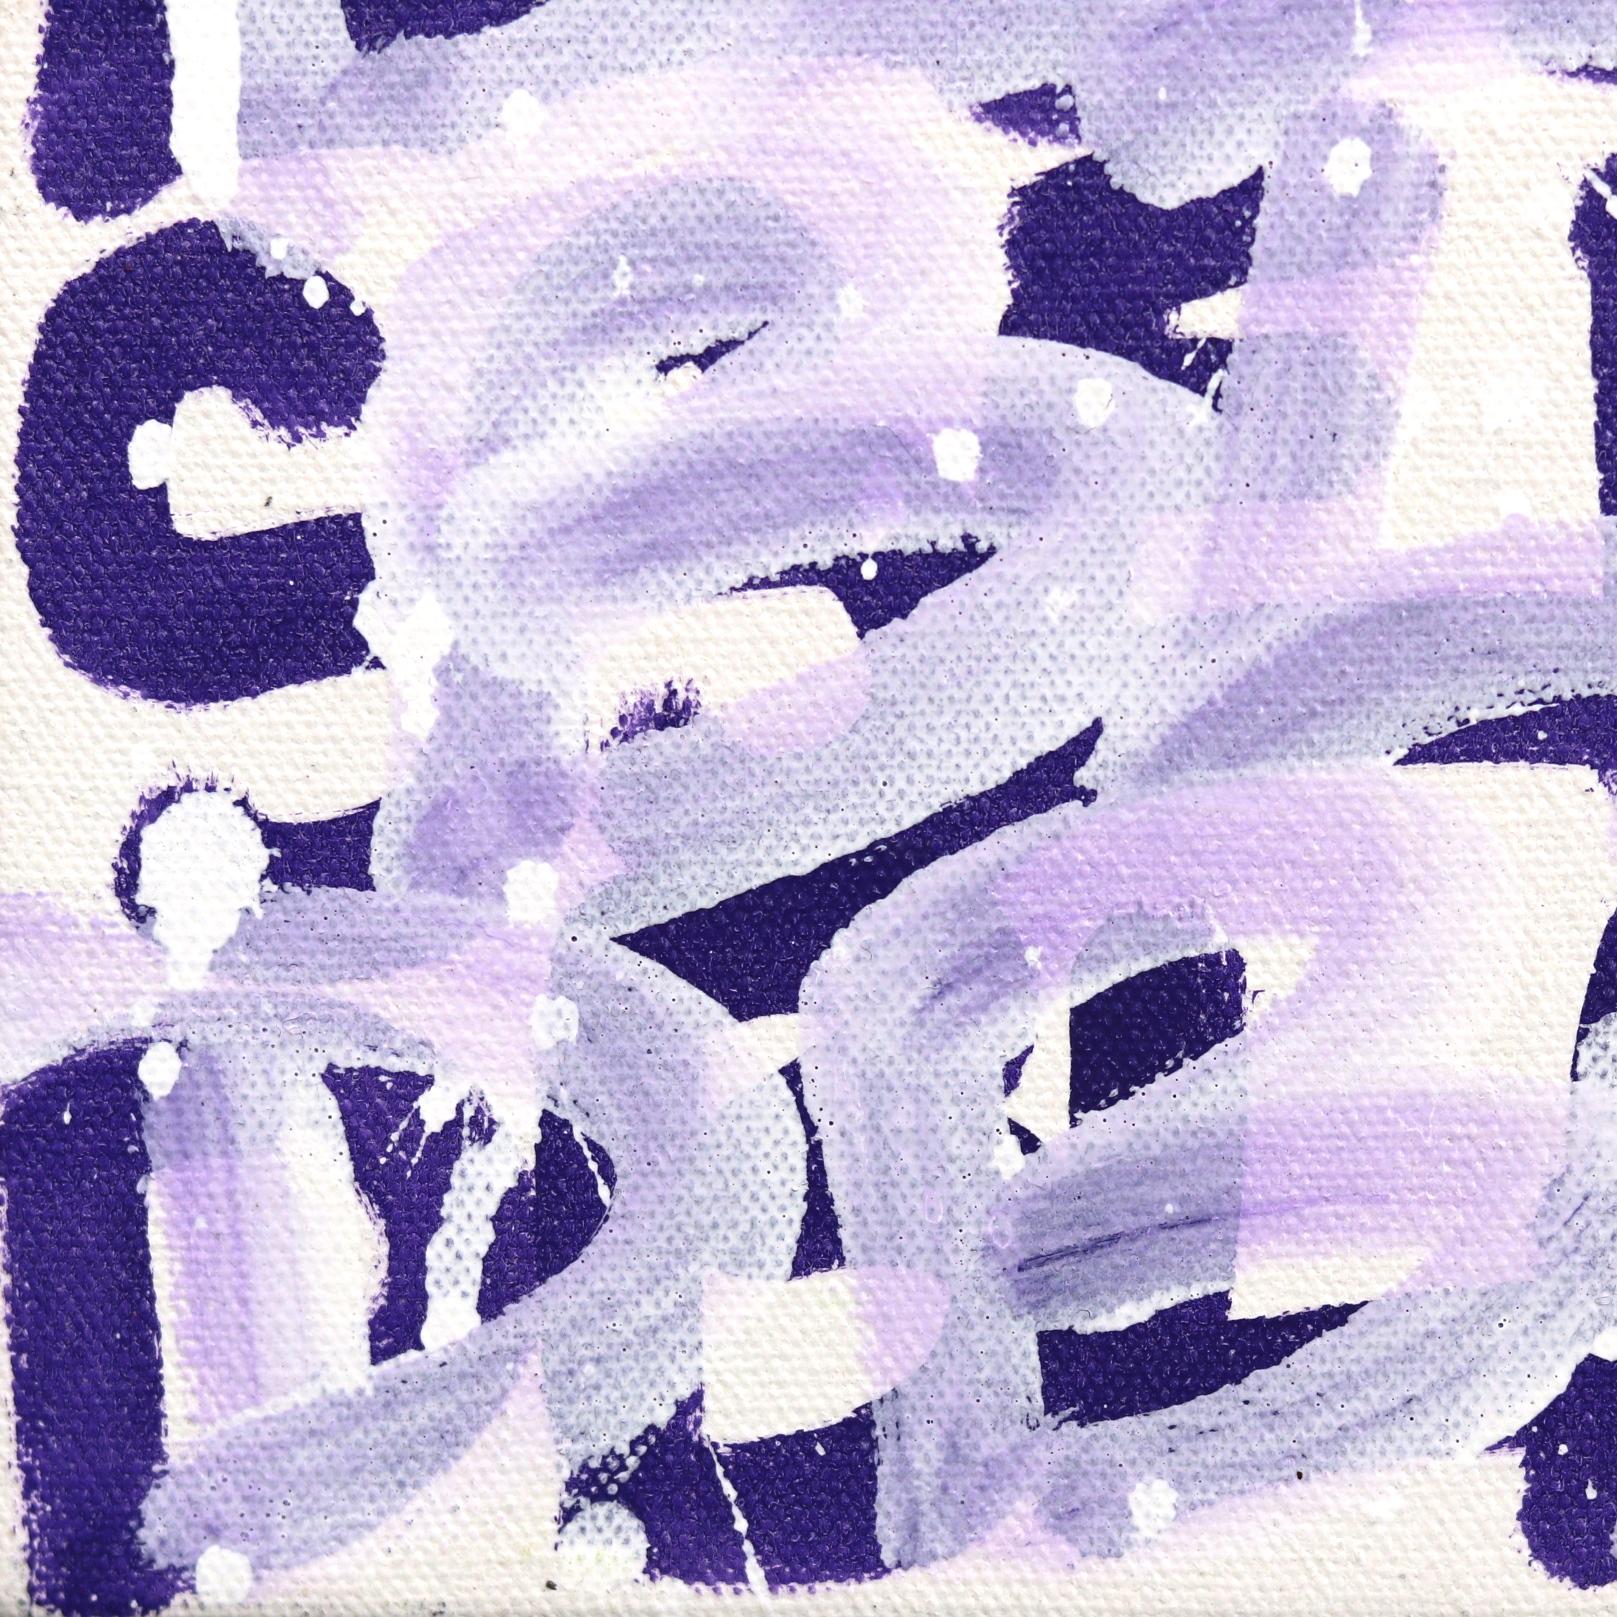 Blessed Pop - Purple Abstract Painting by Amber Goldhammer